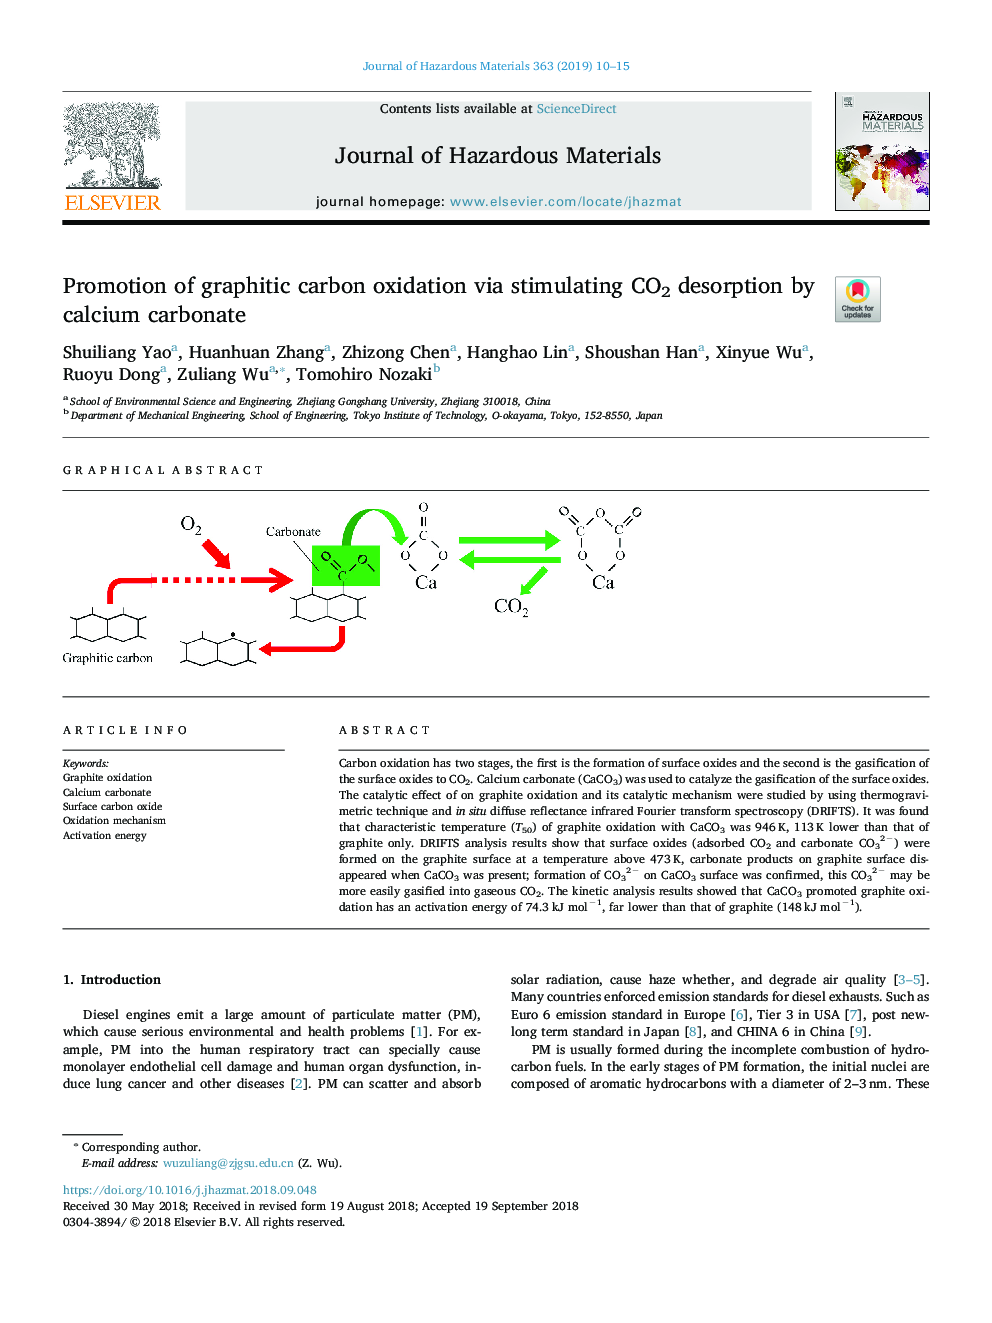 Promotion of graphitic carbon oxidation via stimulating CO2 desorption by calcium carbonate